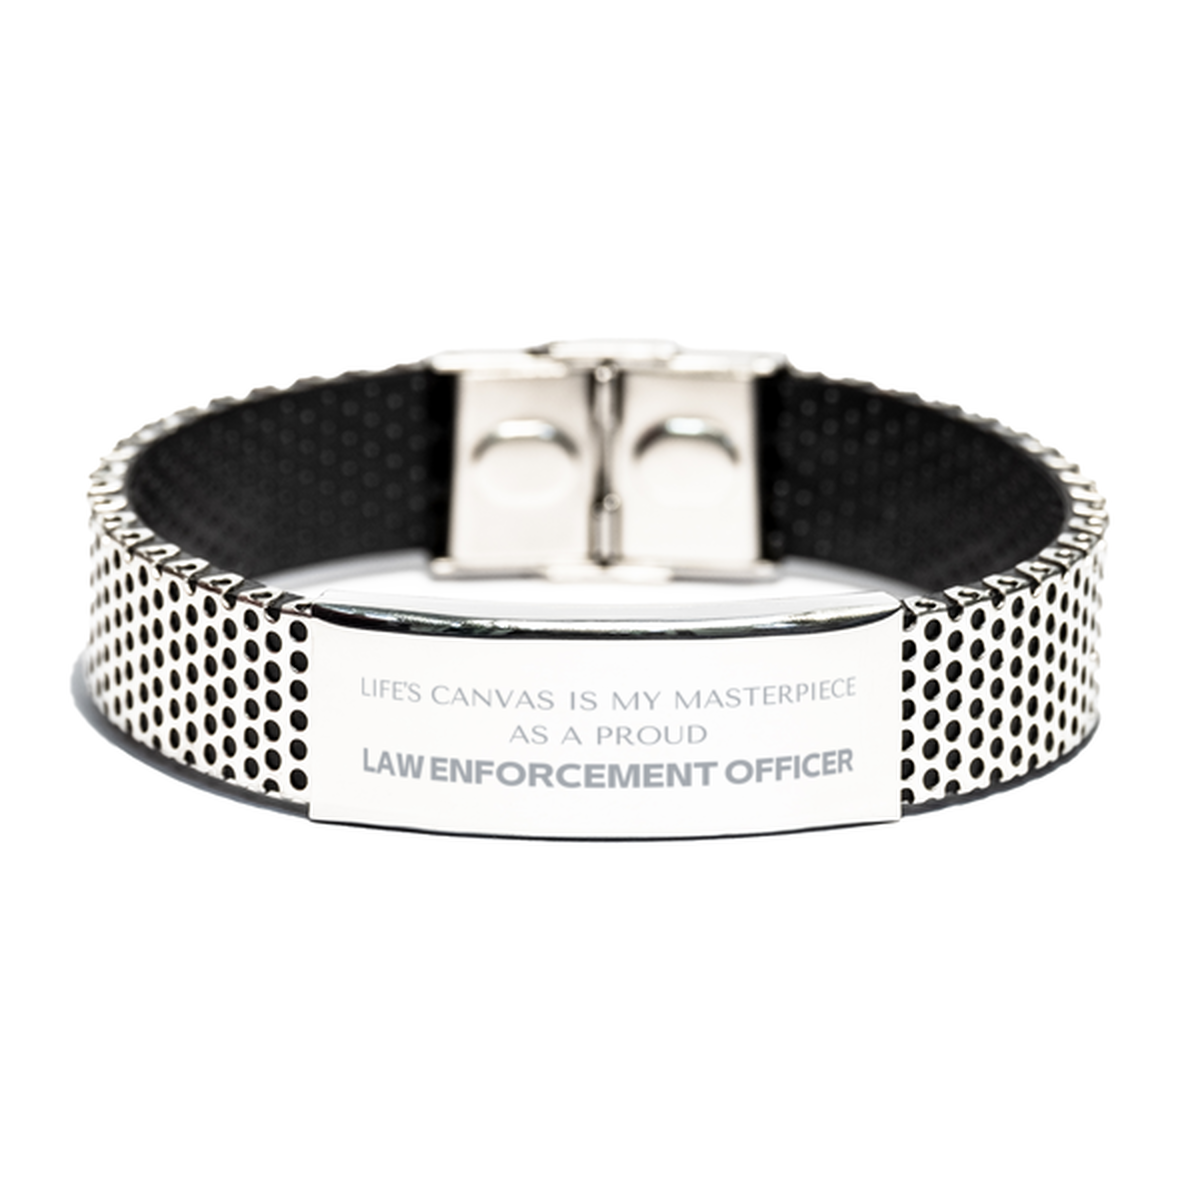 Proud Law Enforcement Officer Gifts, Life's canvas is my masterpiece, Epic Birthday Christmas Unique Stainless Steel Bracelet For Law Enforcement Officer, Coworkers, Men, Women, Friends